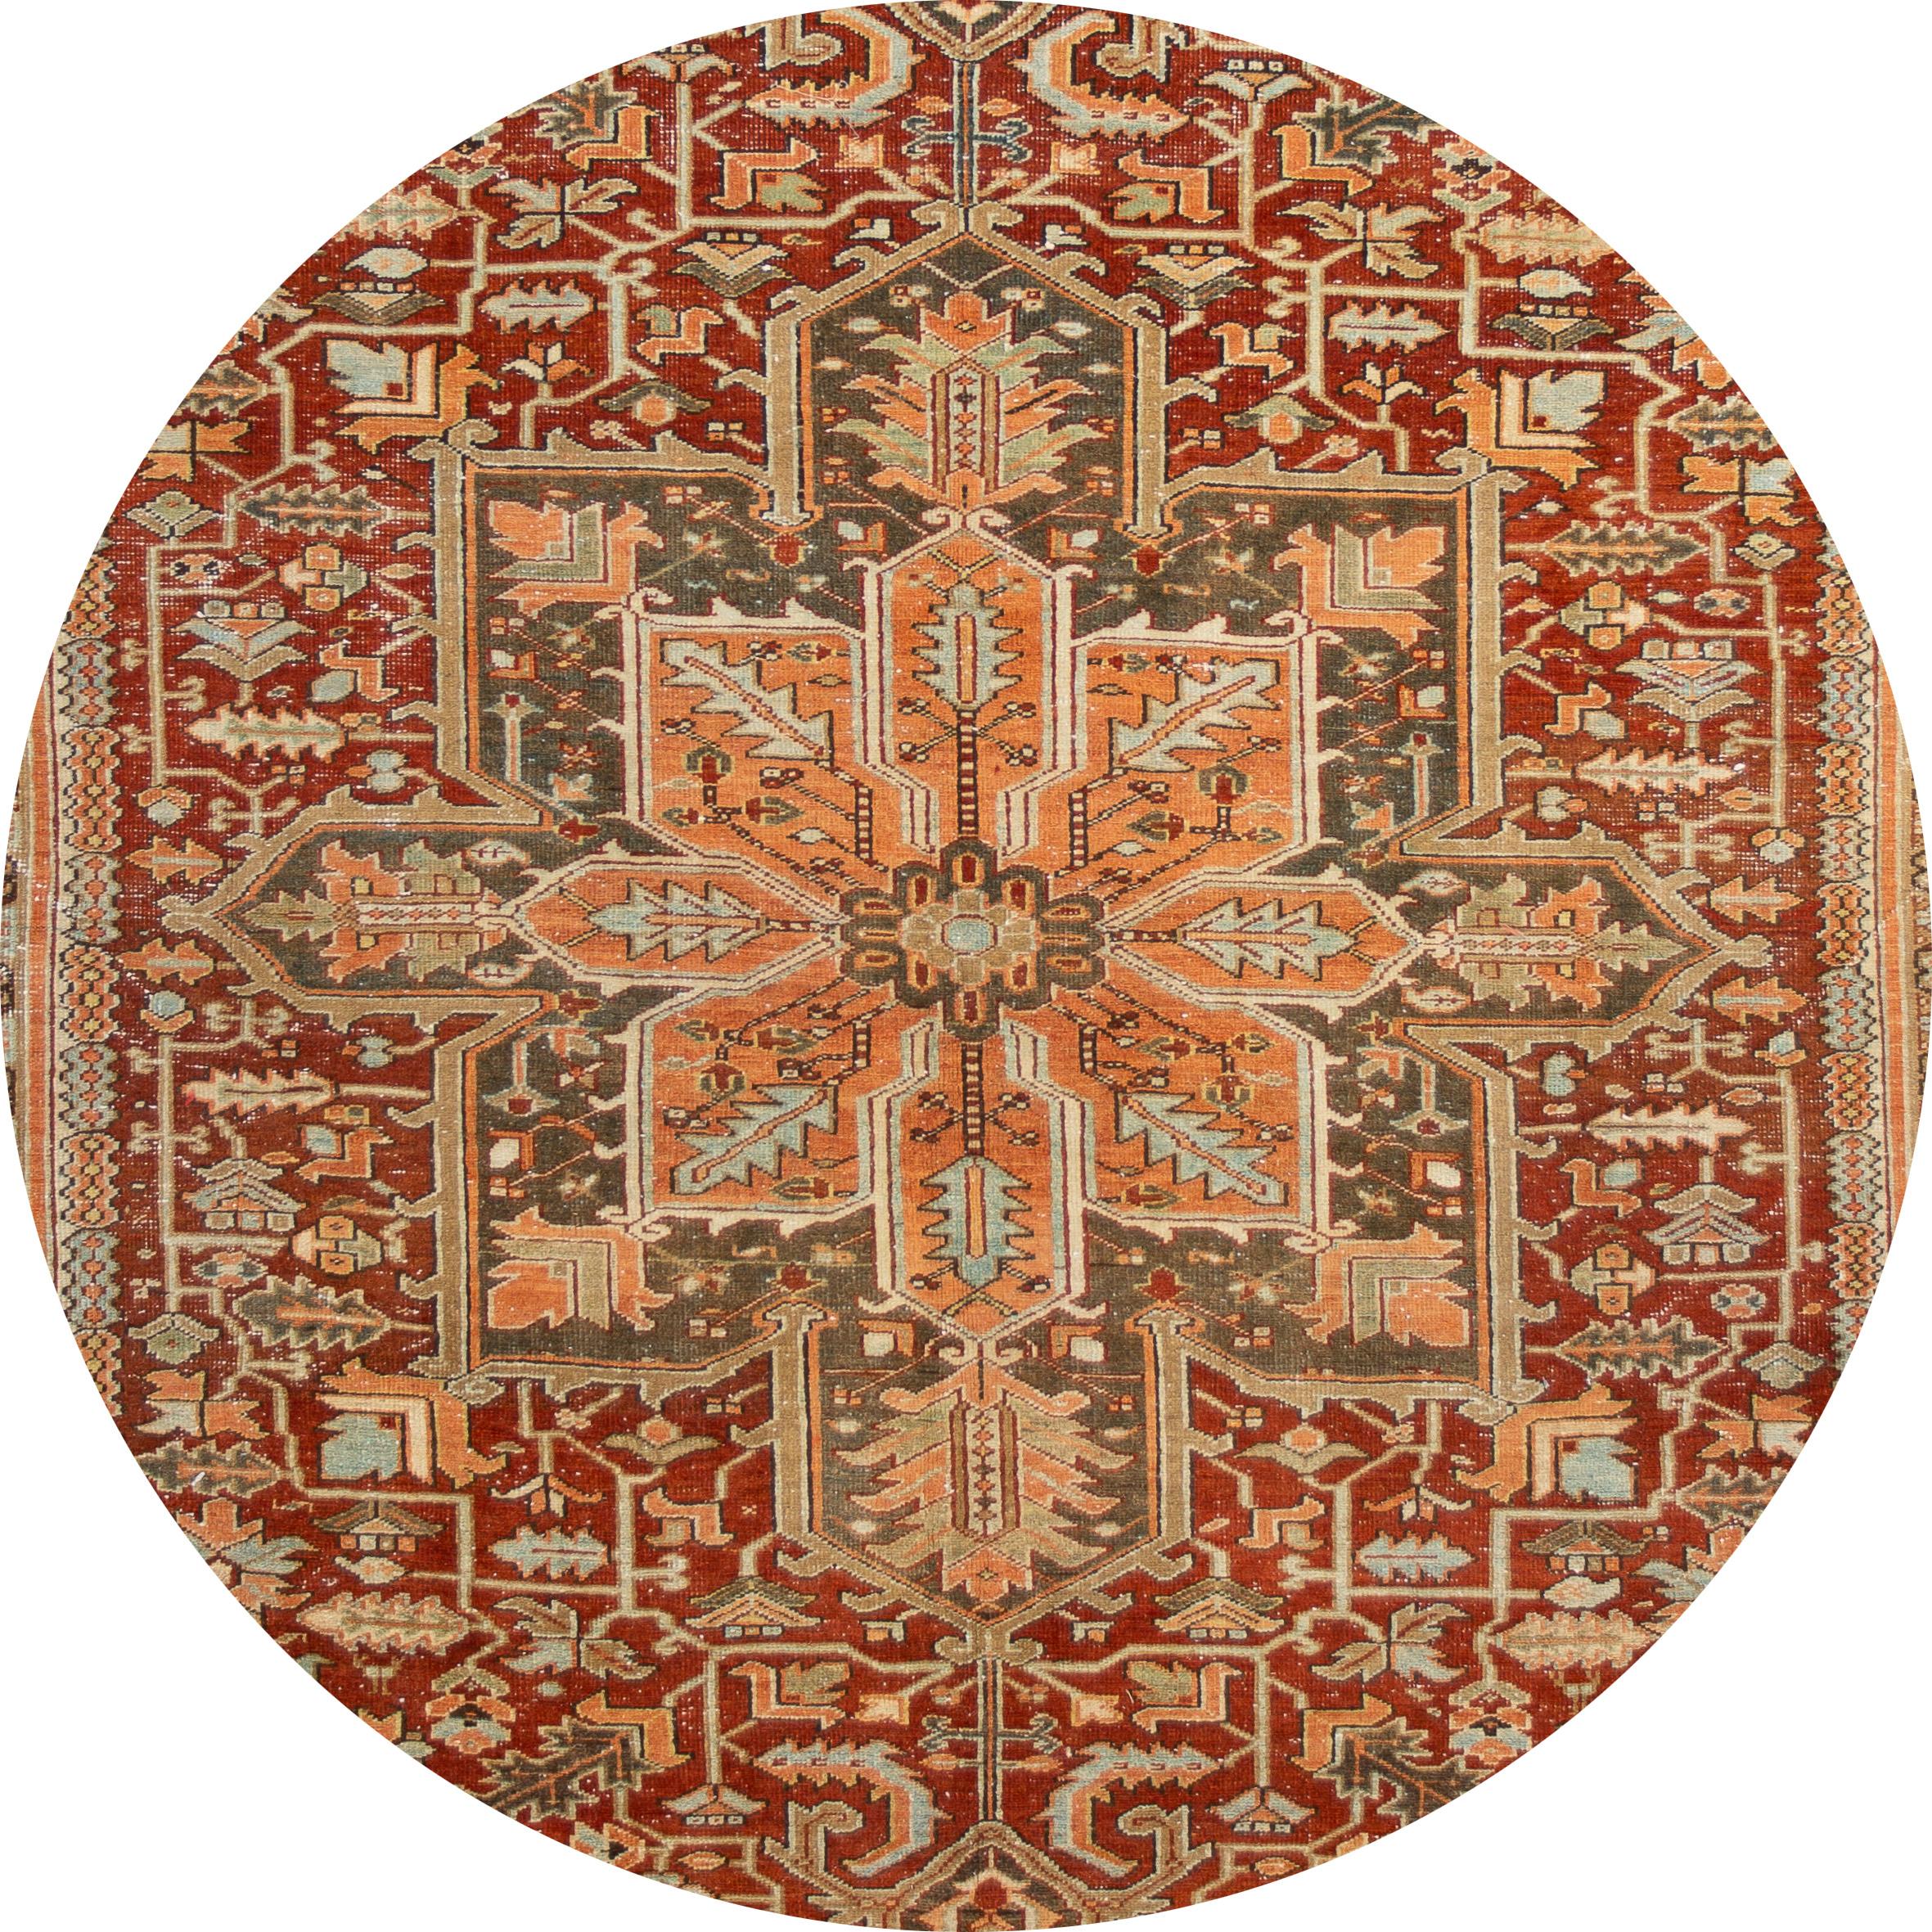 Beautiful antique Heriz rug, hand knotted wool with a rust field, tan and blue accents in all-over center medallion design,
circa 1920.
This rug measures 9' x 12' 1